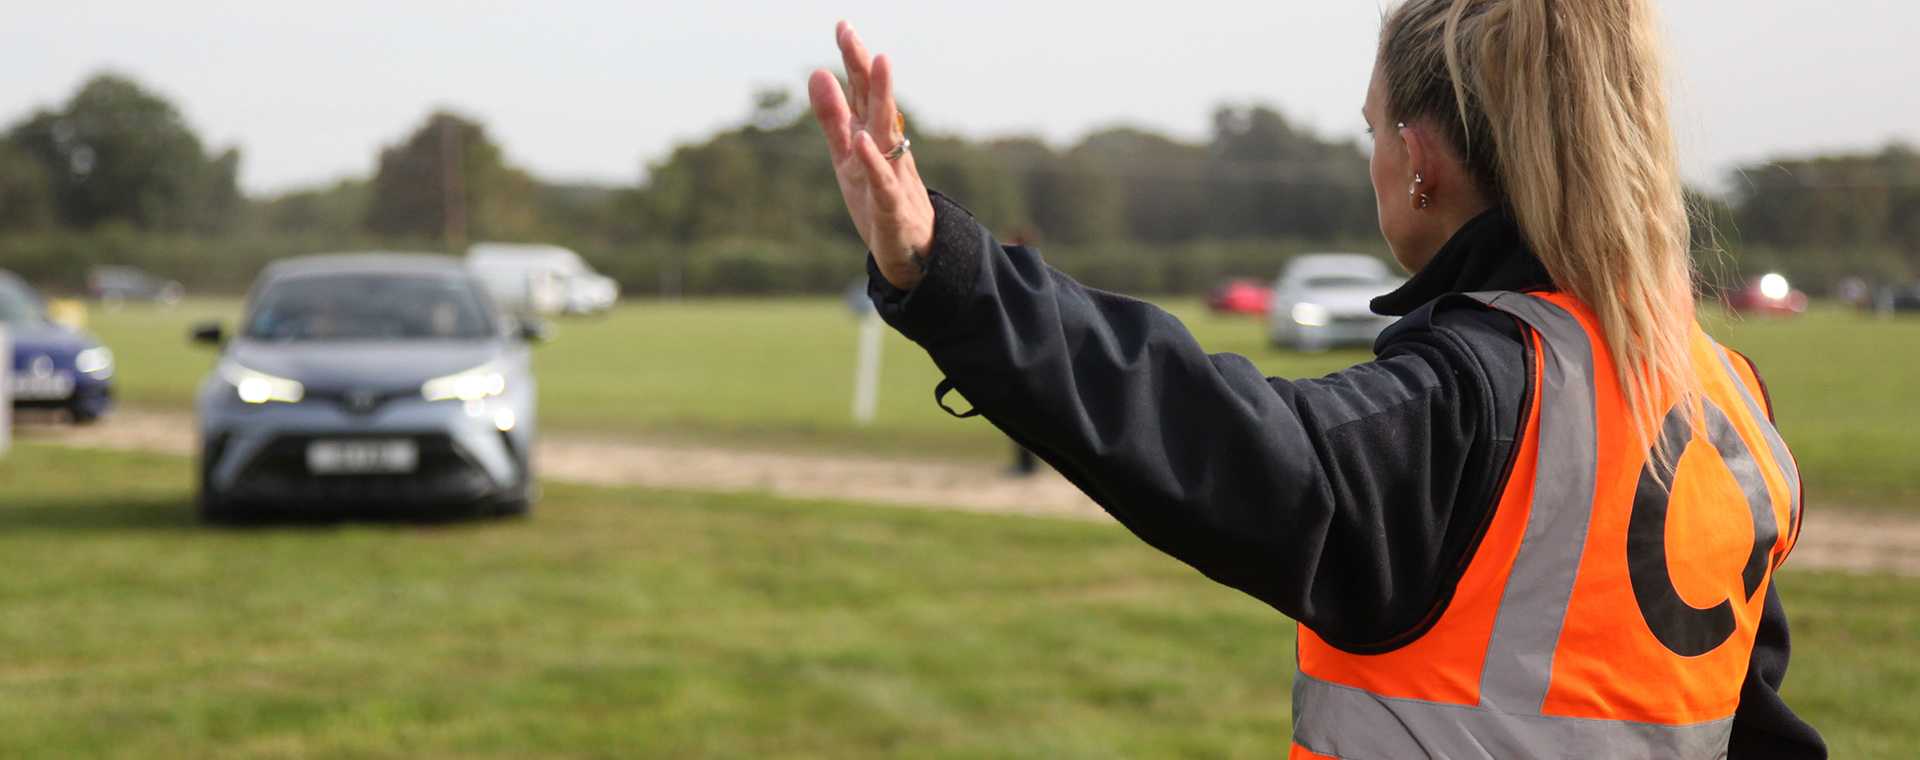 A Tracis Events Marshal directig traffic